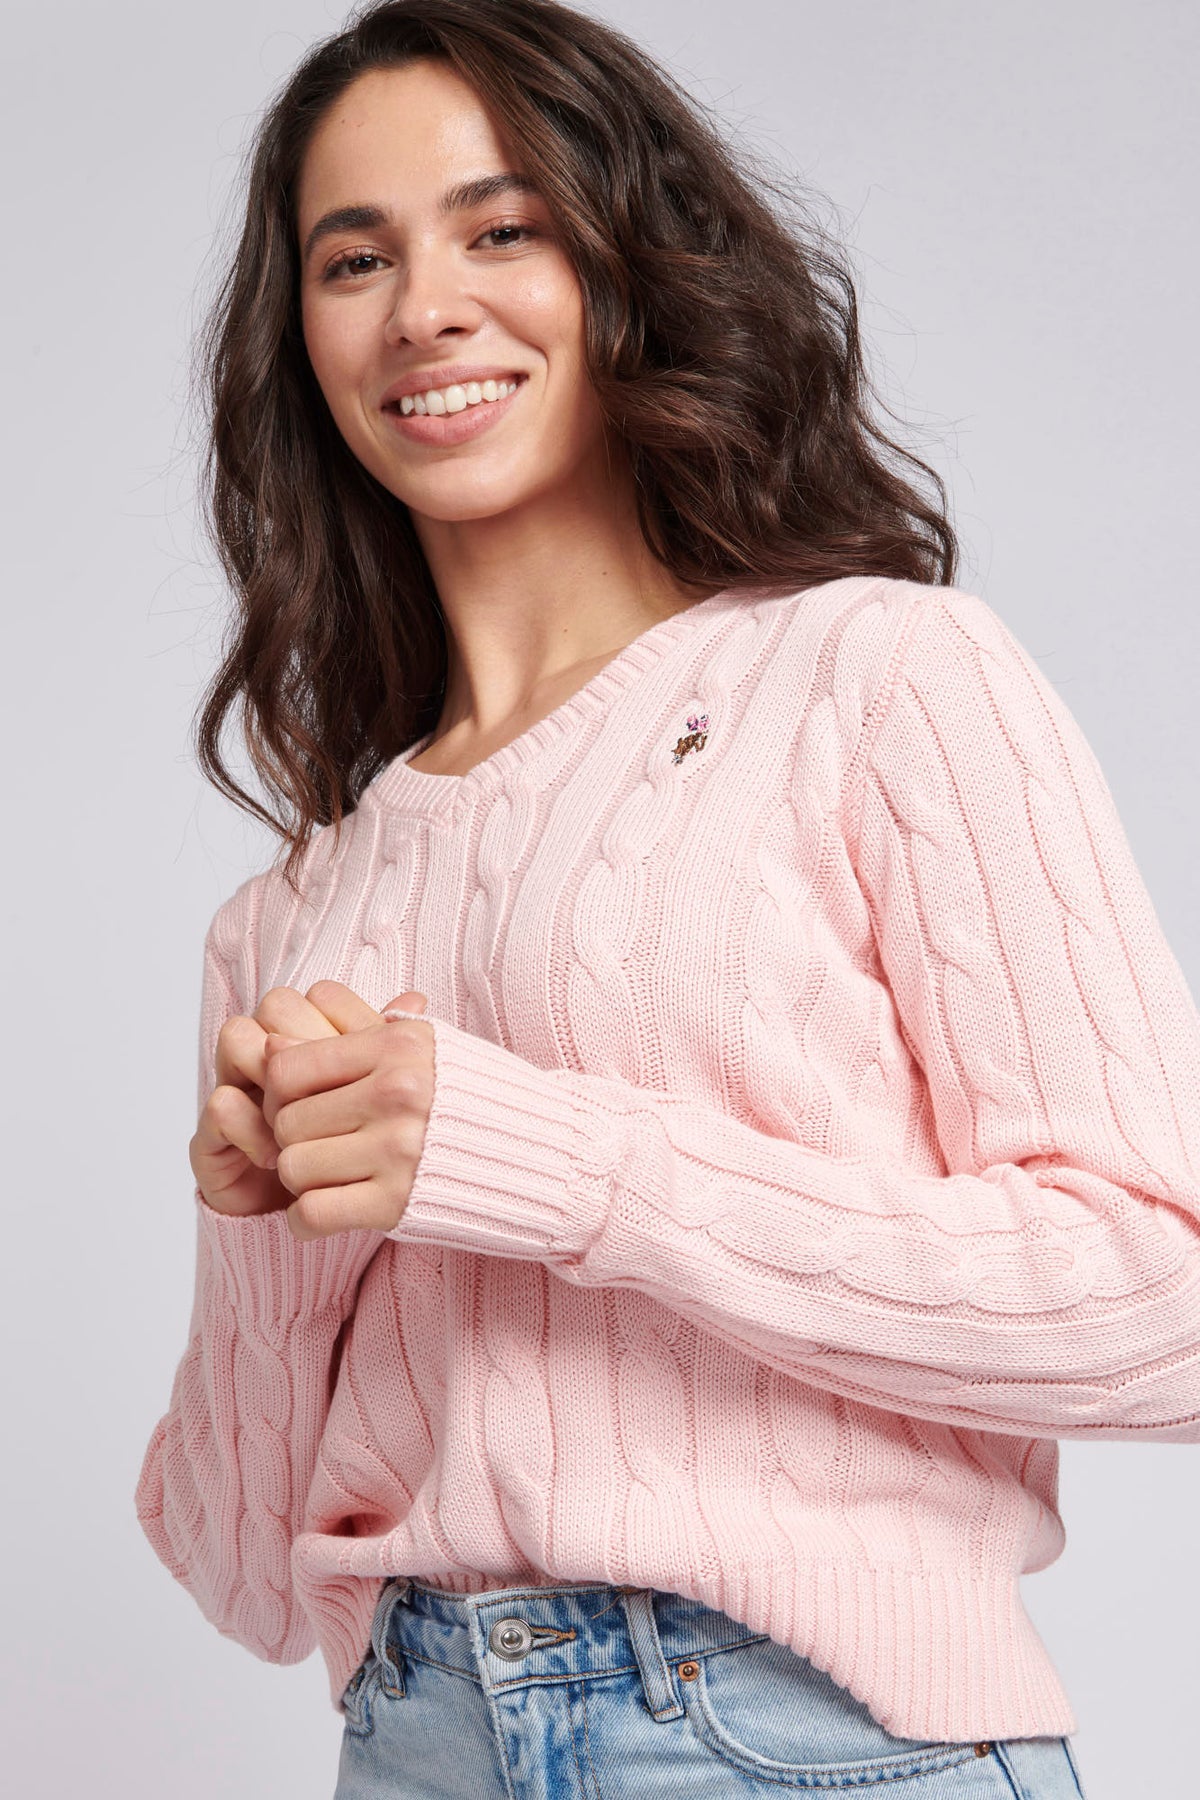 Womens V-Neck Cable Knit Jumper in Crystal Rose